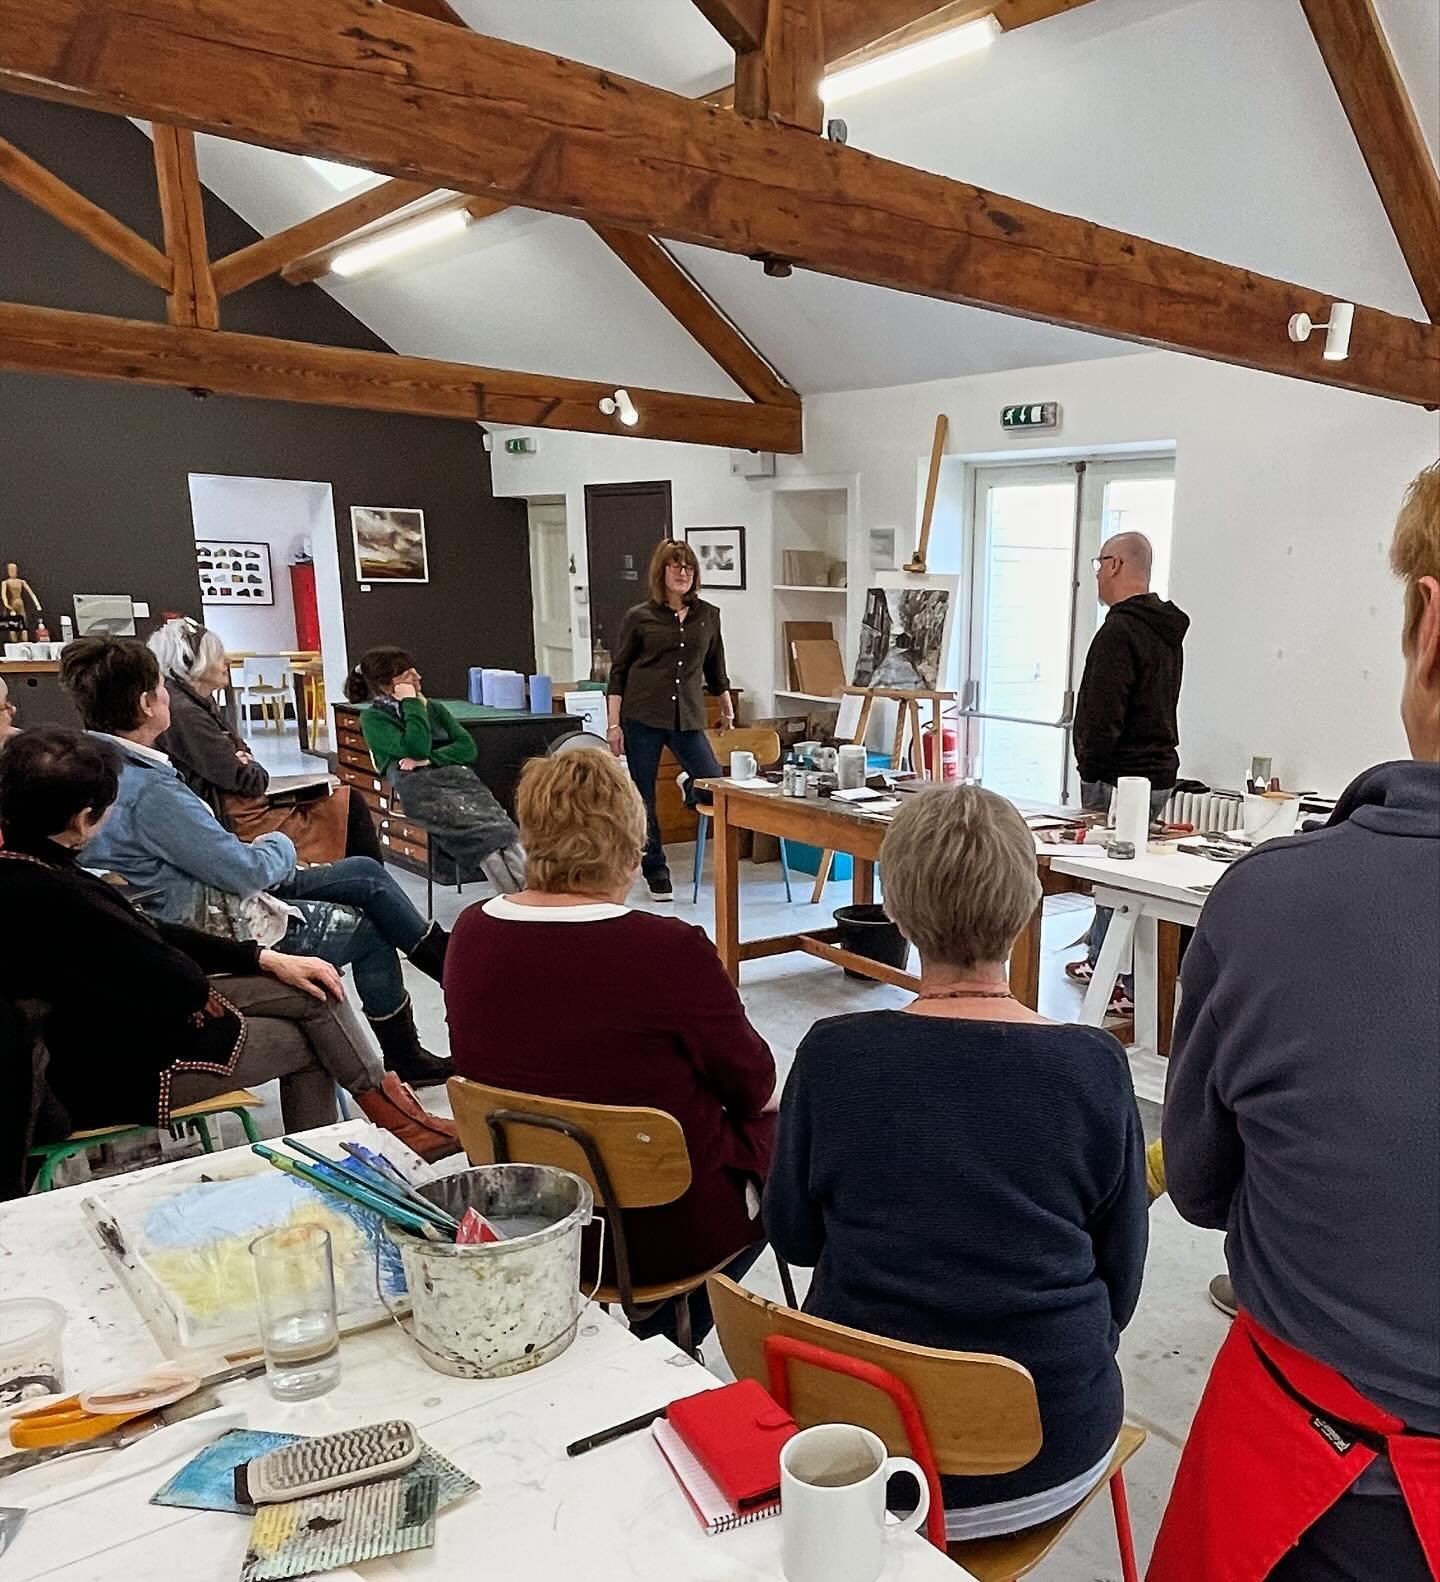 Big Thank You goes out to Pete Monaghan for his course here at The Lund this week - What a great week we&rsquo;ve had :-)

Sketching out around our own converted barns and buildings here at The Lund, followed by a trip into our local market town of E